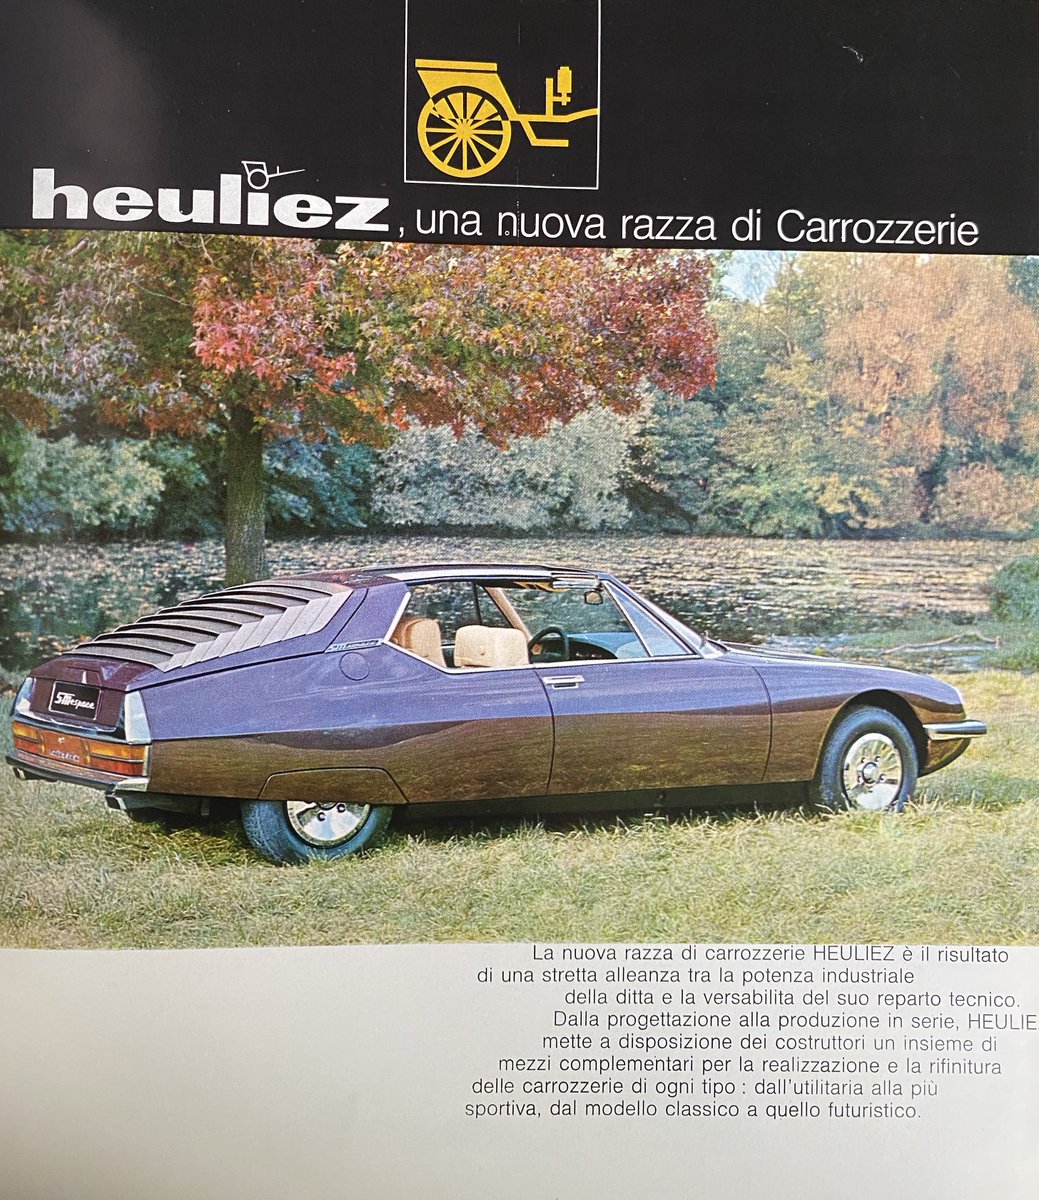 They sure don’t do car ads like they used to #heuliez #citroensm #1972